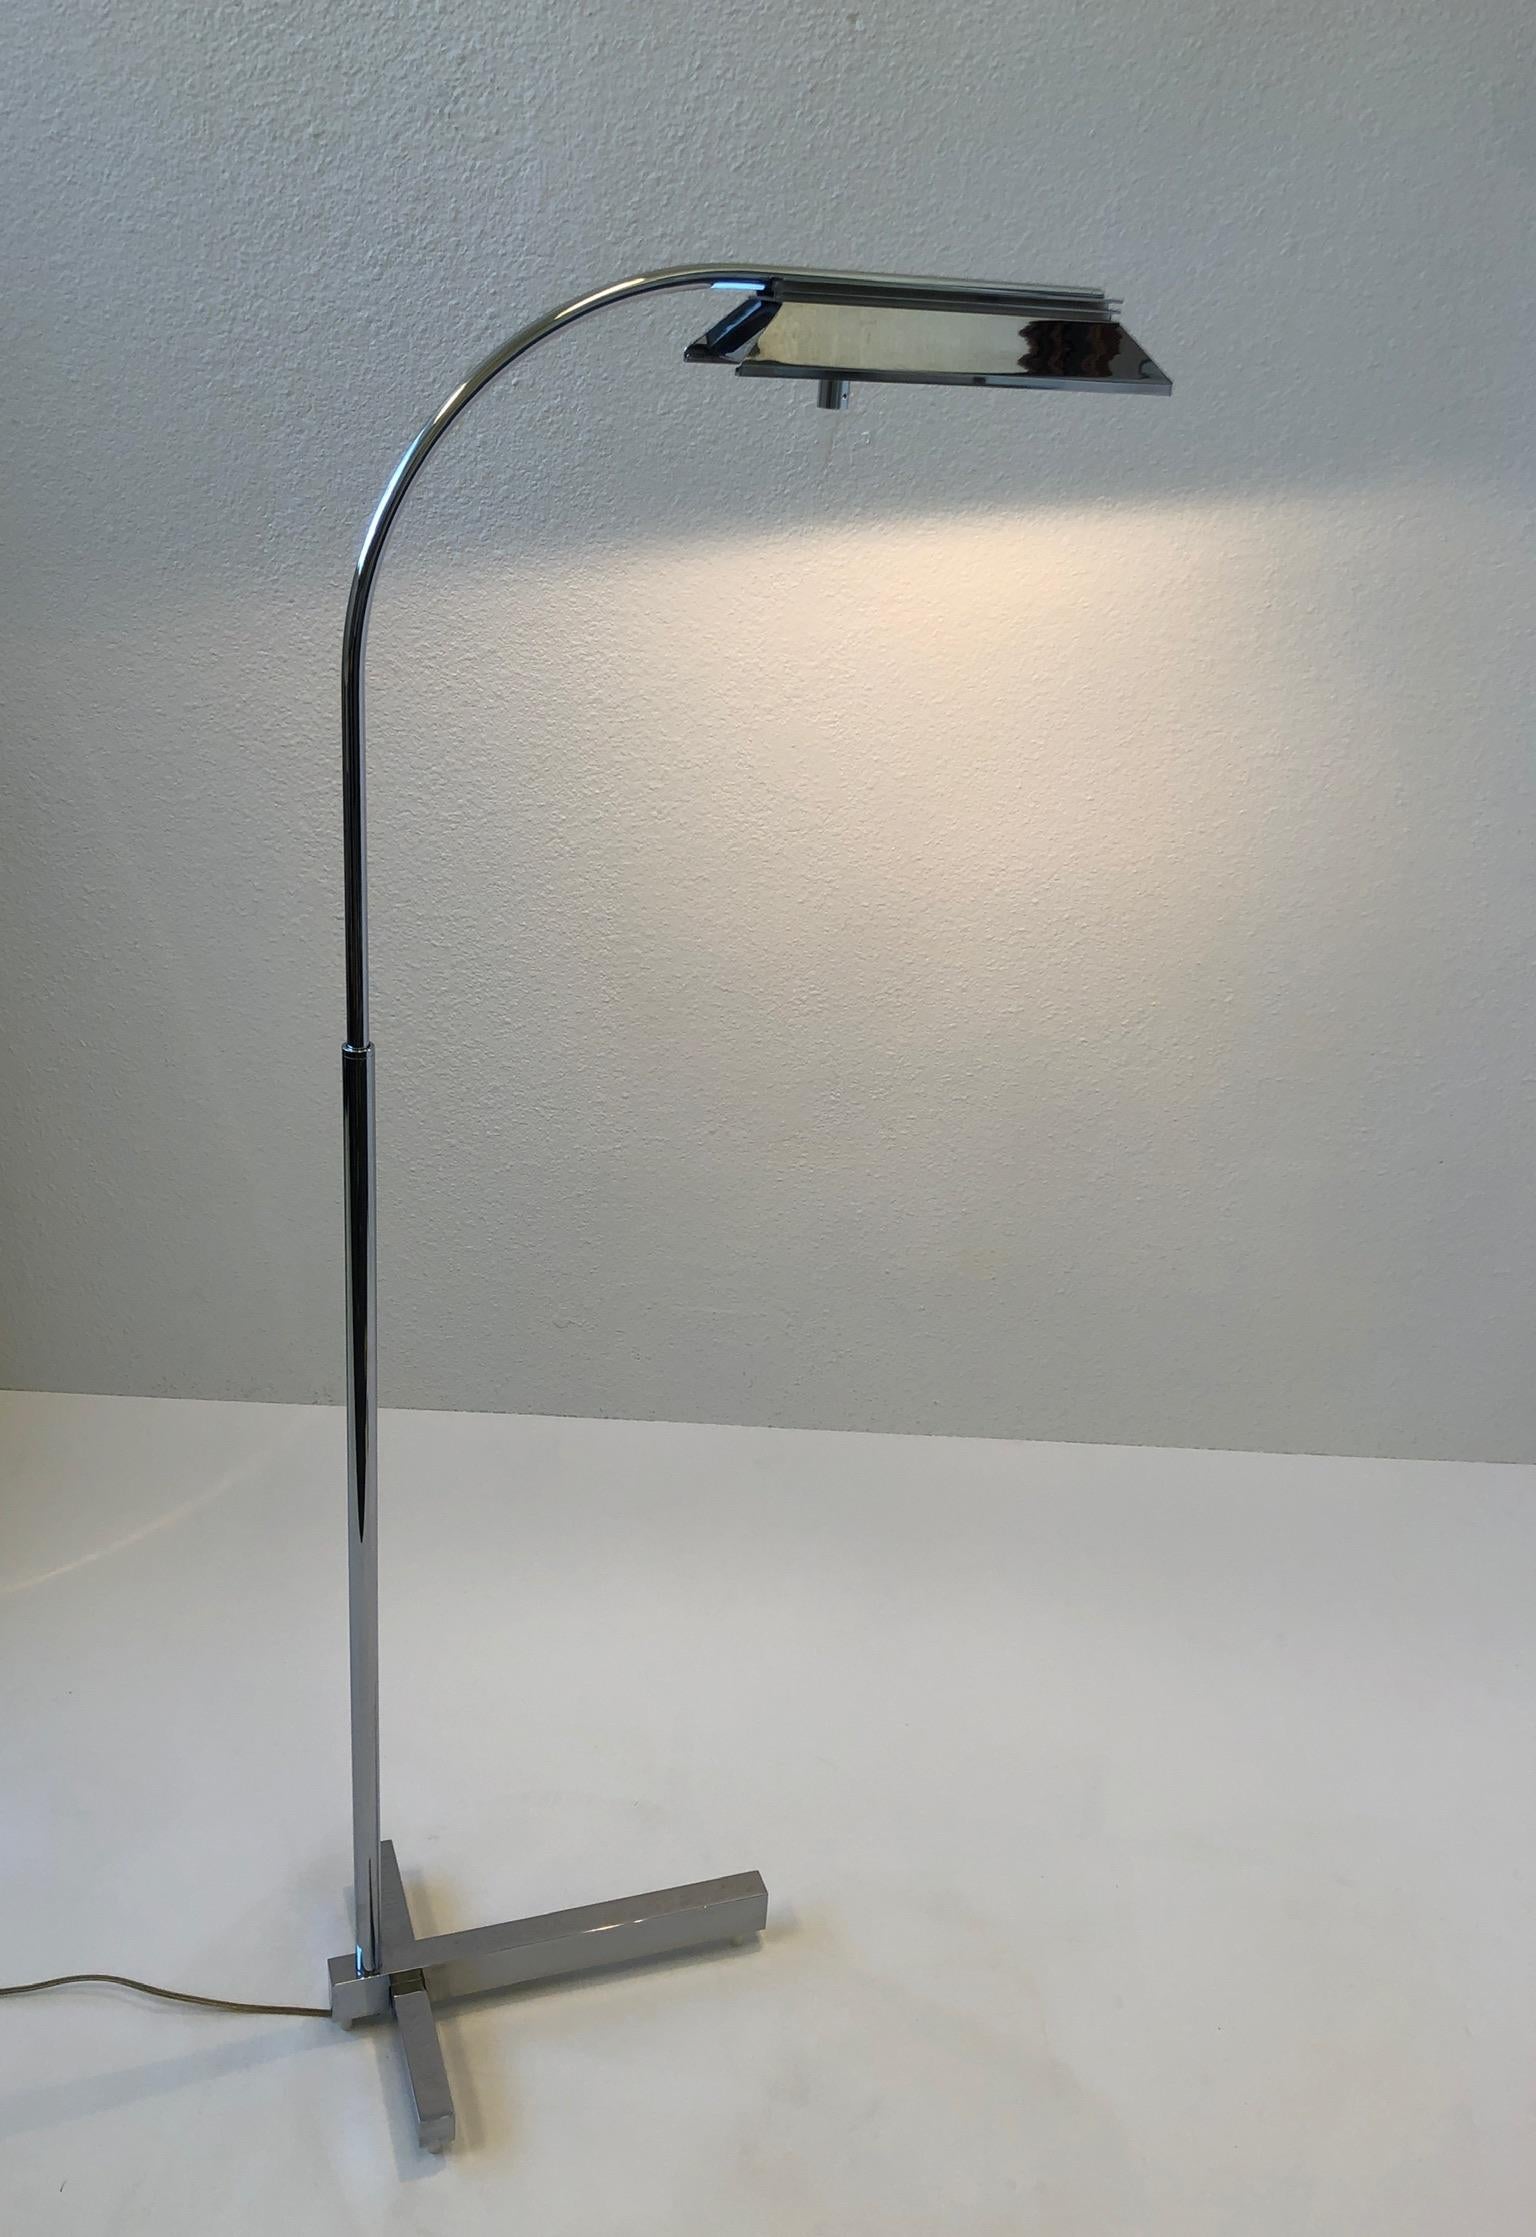 Adjustable Chrome Floor Lamp by Casella In Excellent Condition For Sale In Palm Springs, CA